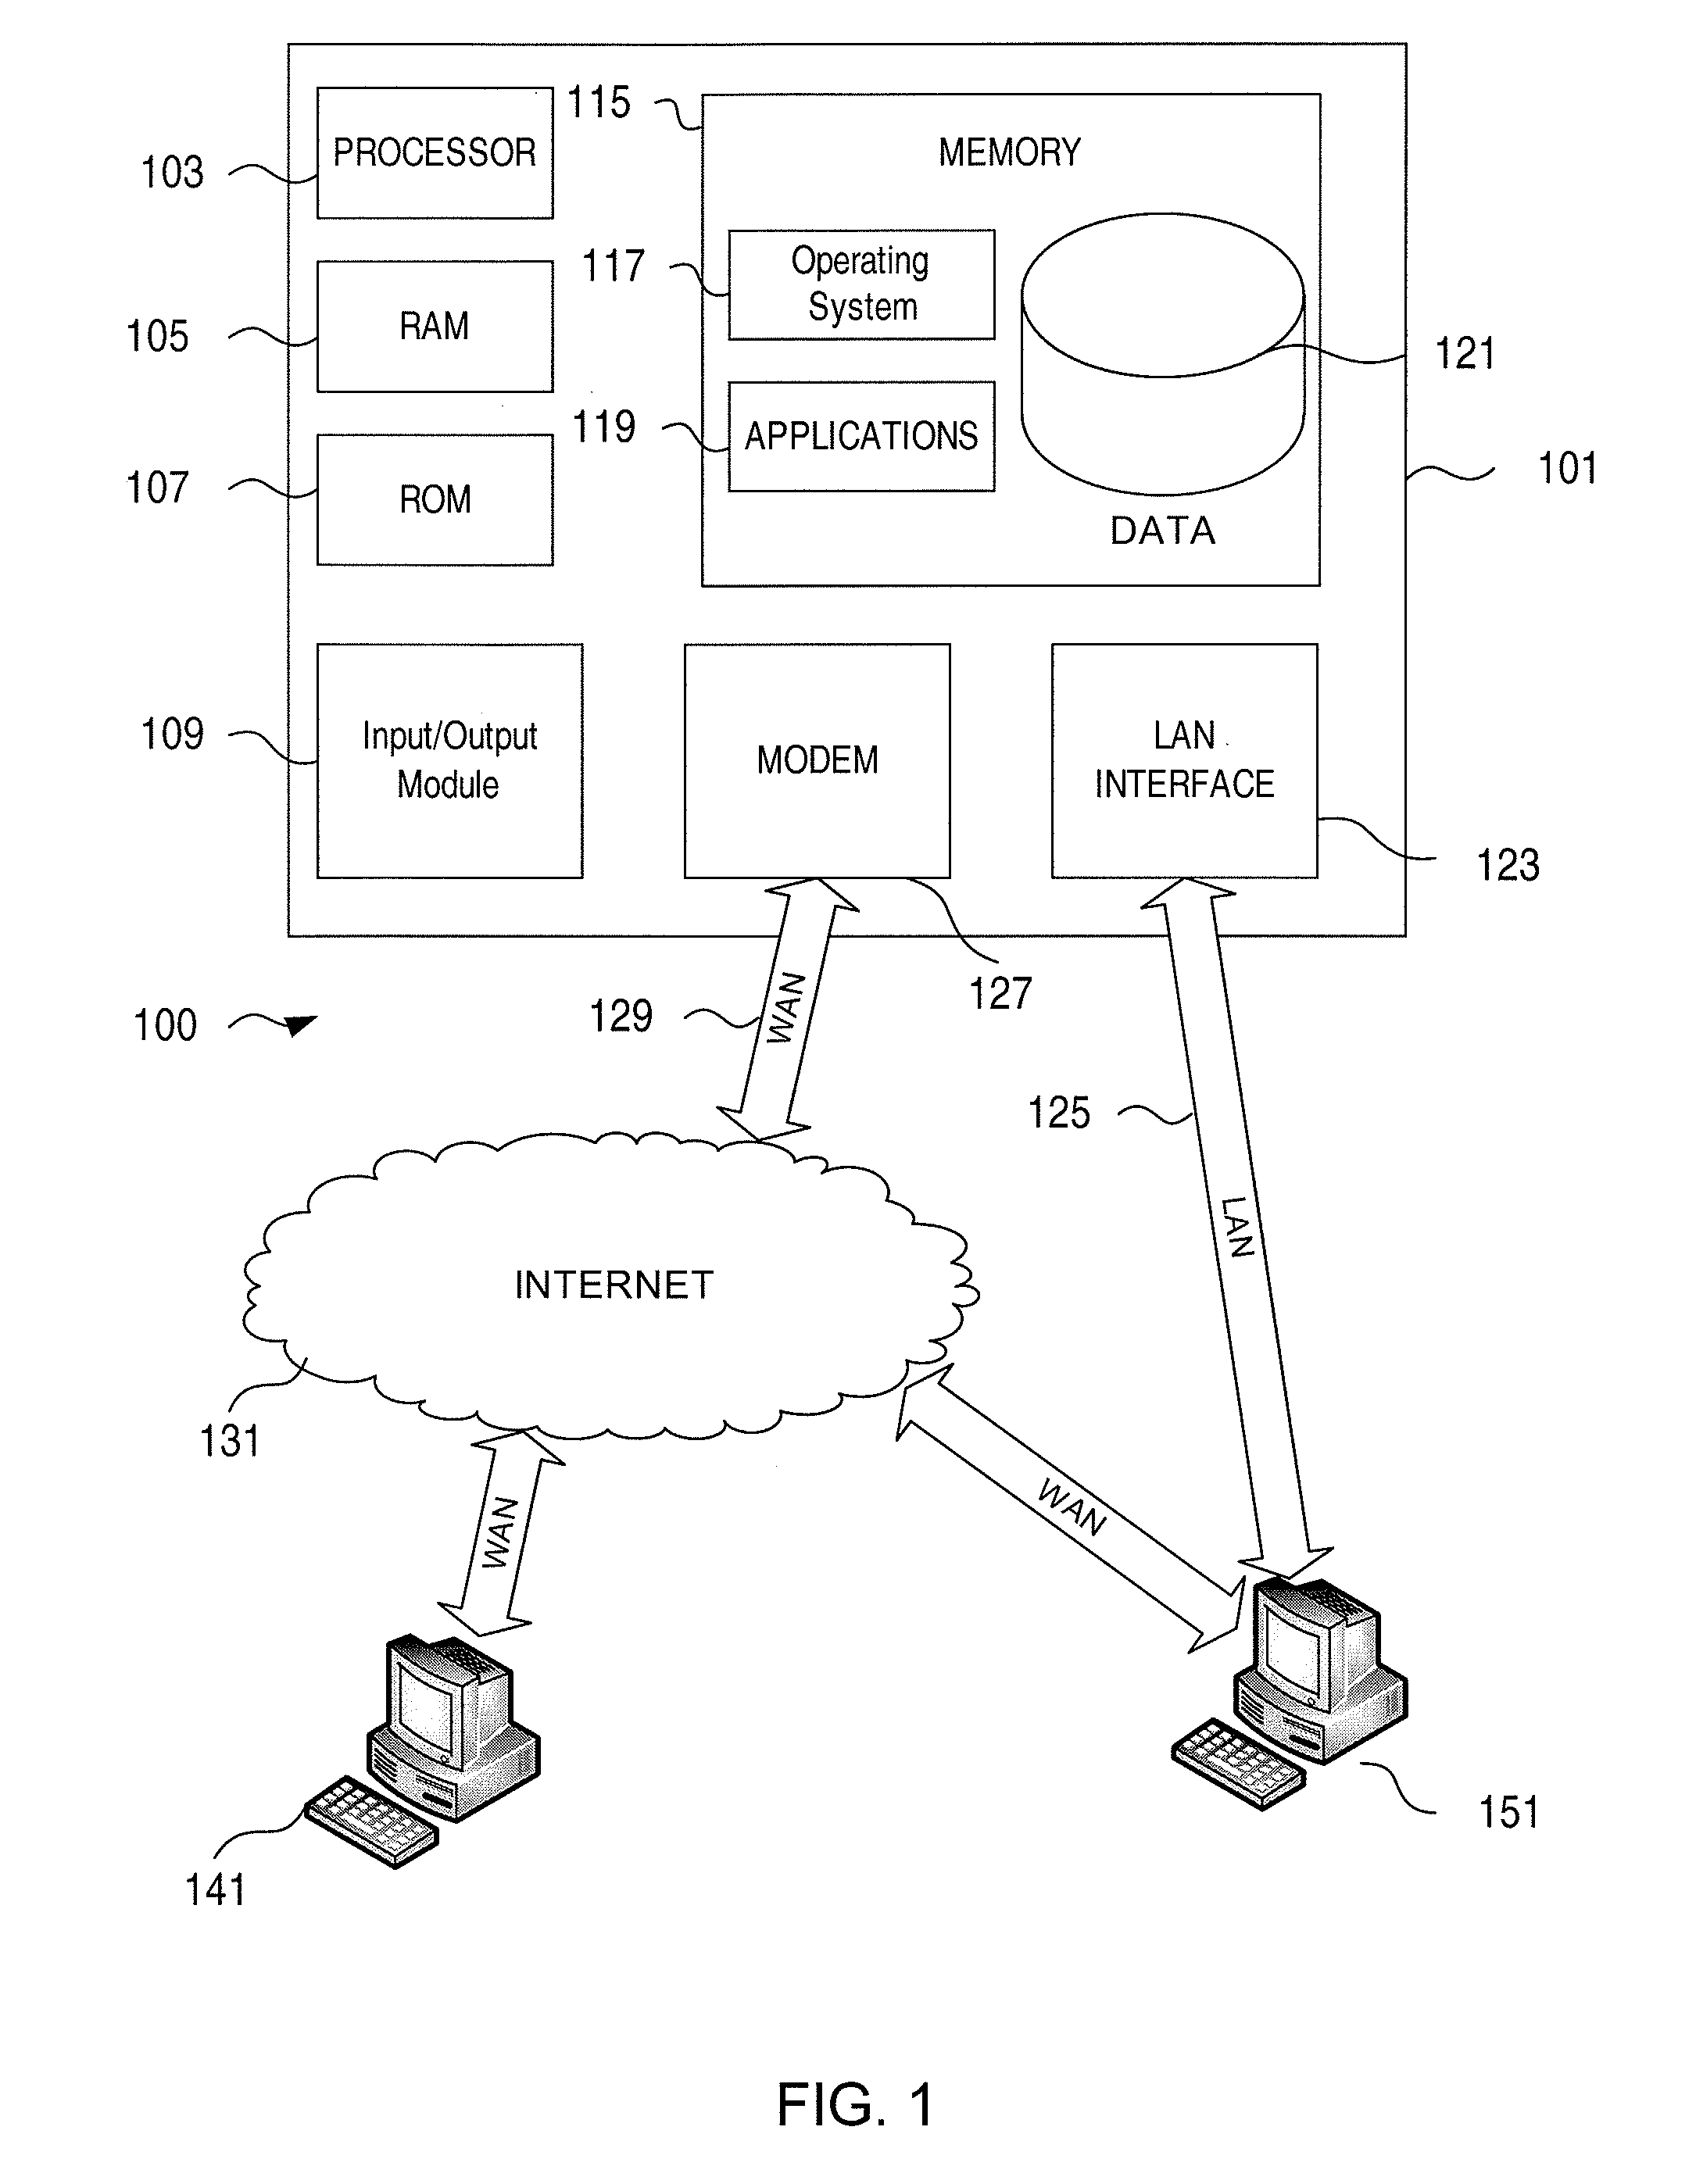 System and Method for Improved In-Browser Notification